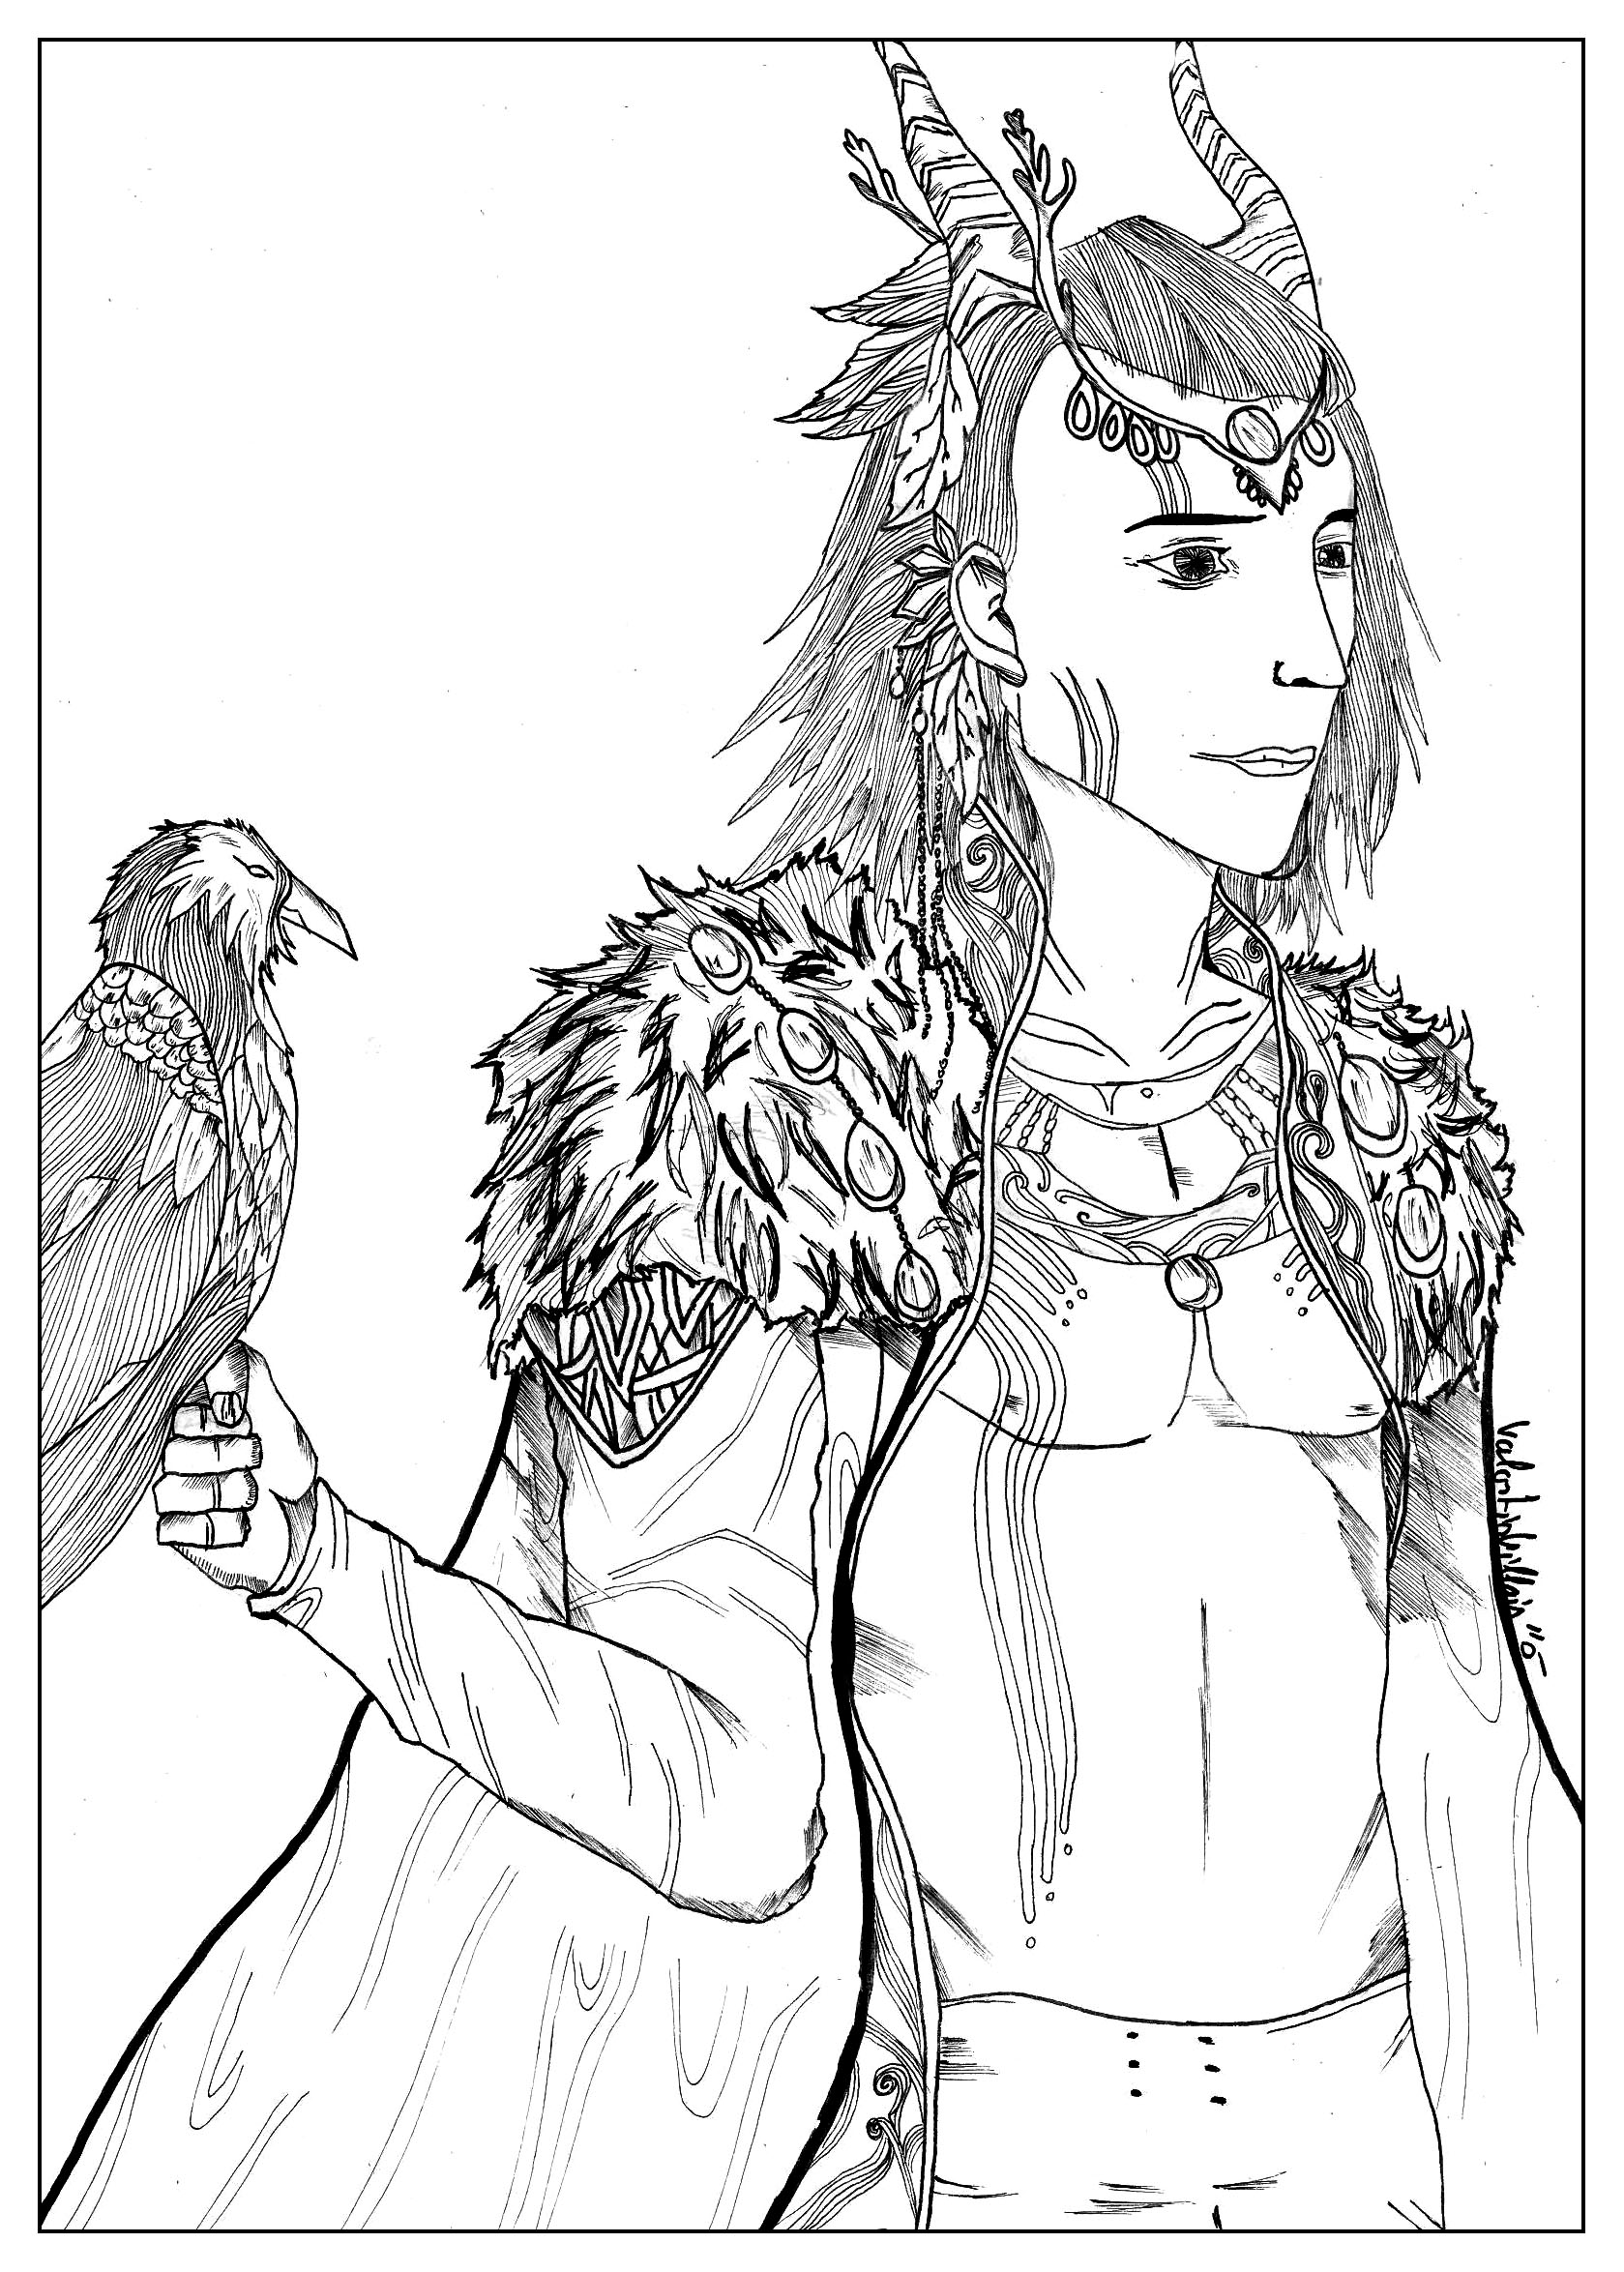 Coloring page of a Falconer elf, Artist : Valentin